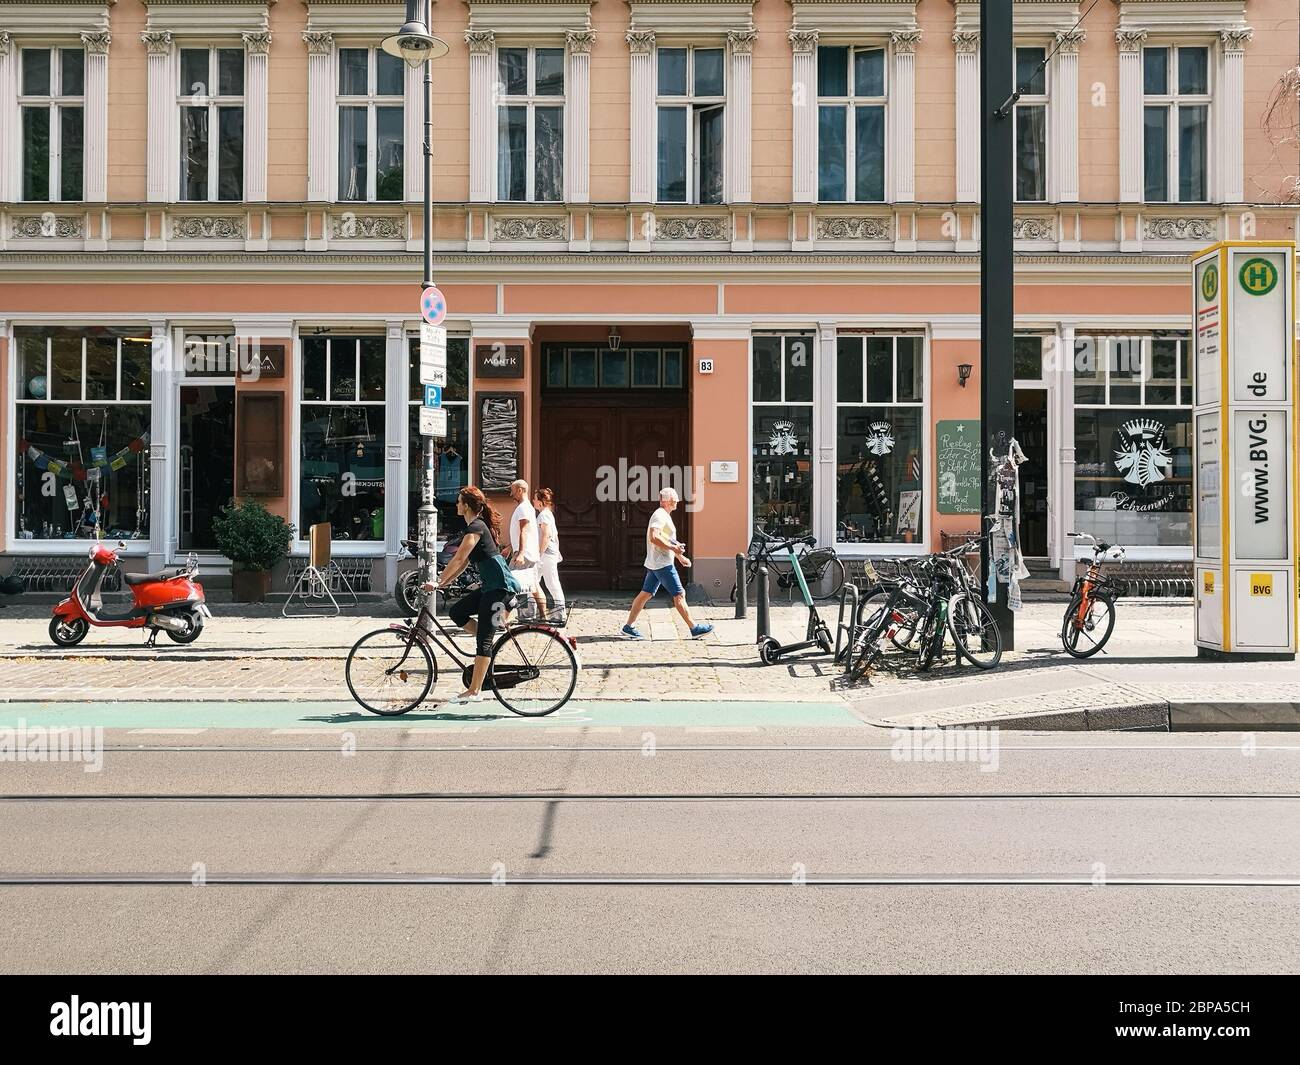 Berlin, Germany - July 27, 2019: Street scene with cyclist in Scheunenviertel quarter in Berlin Mitte. It is one of oldest and most charismatic neighb Stock Photo